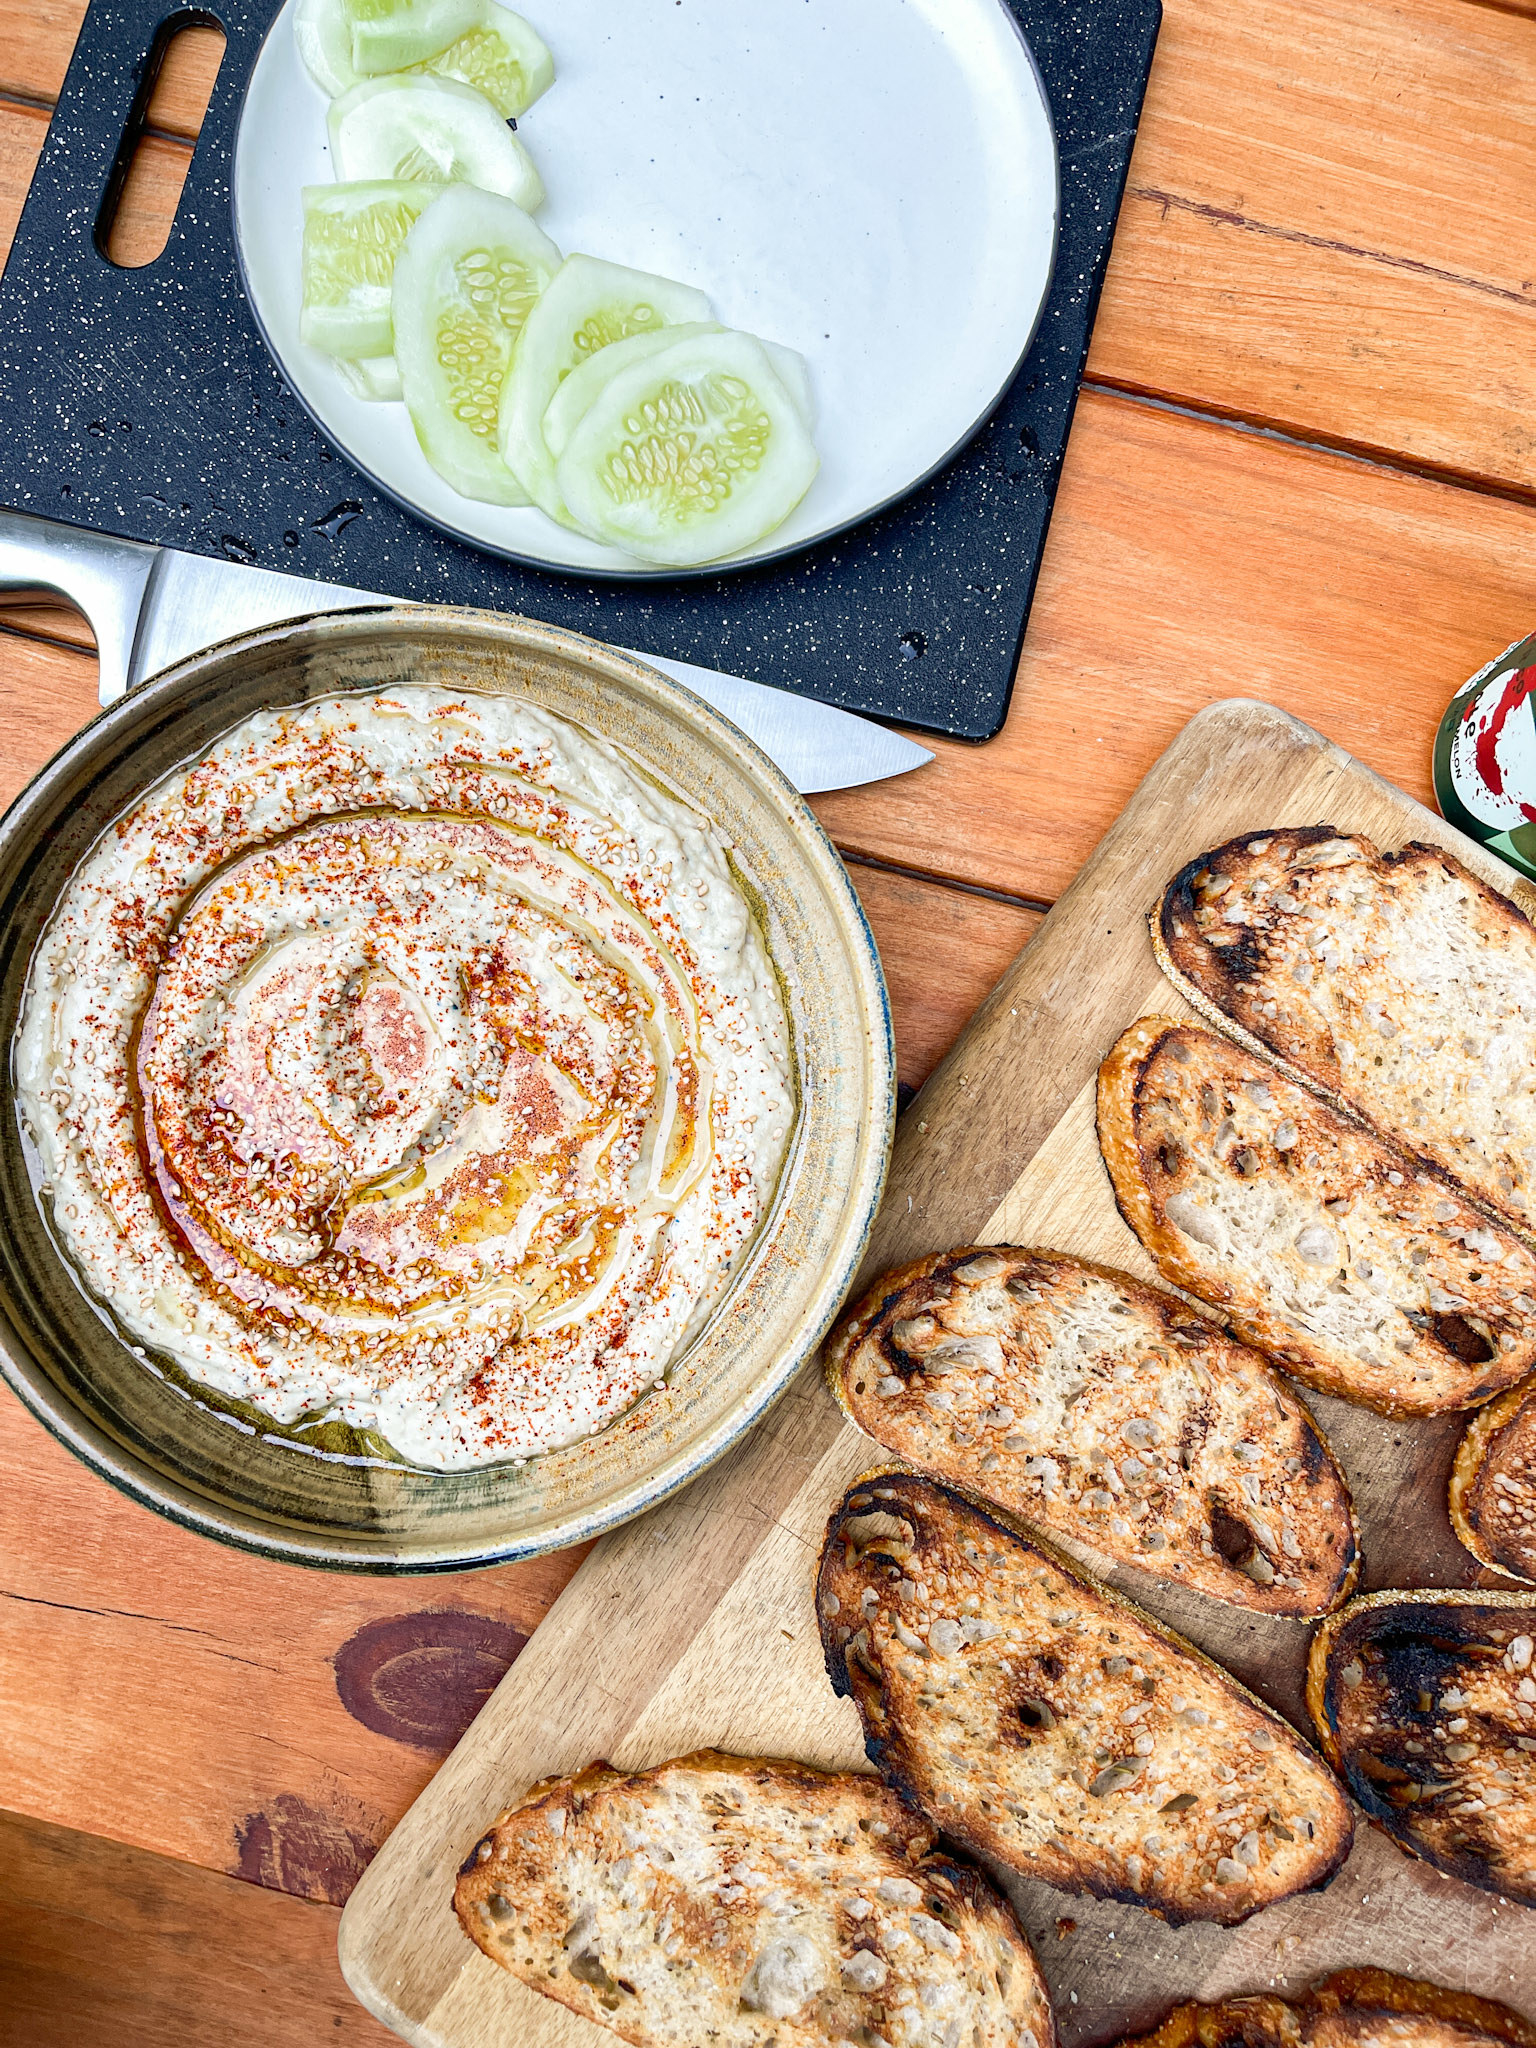 baba ganoush in a bowl next to grilled bread and cucumbers